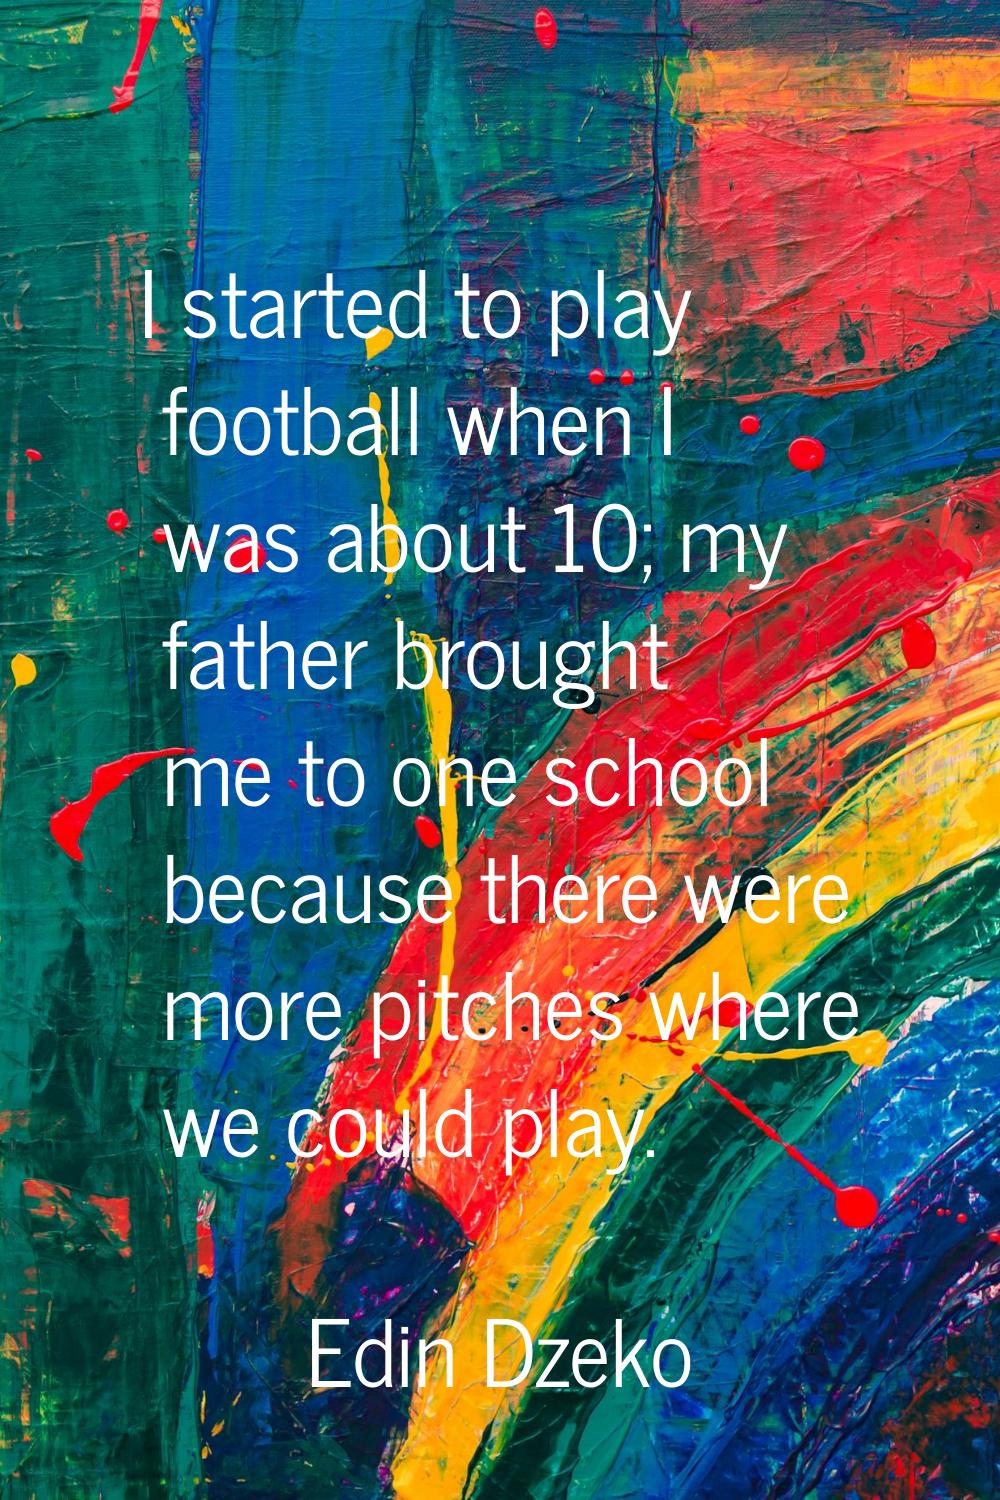 I started to play football when I was about 10; my father brought me to one school because there we